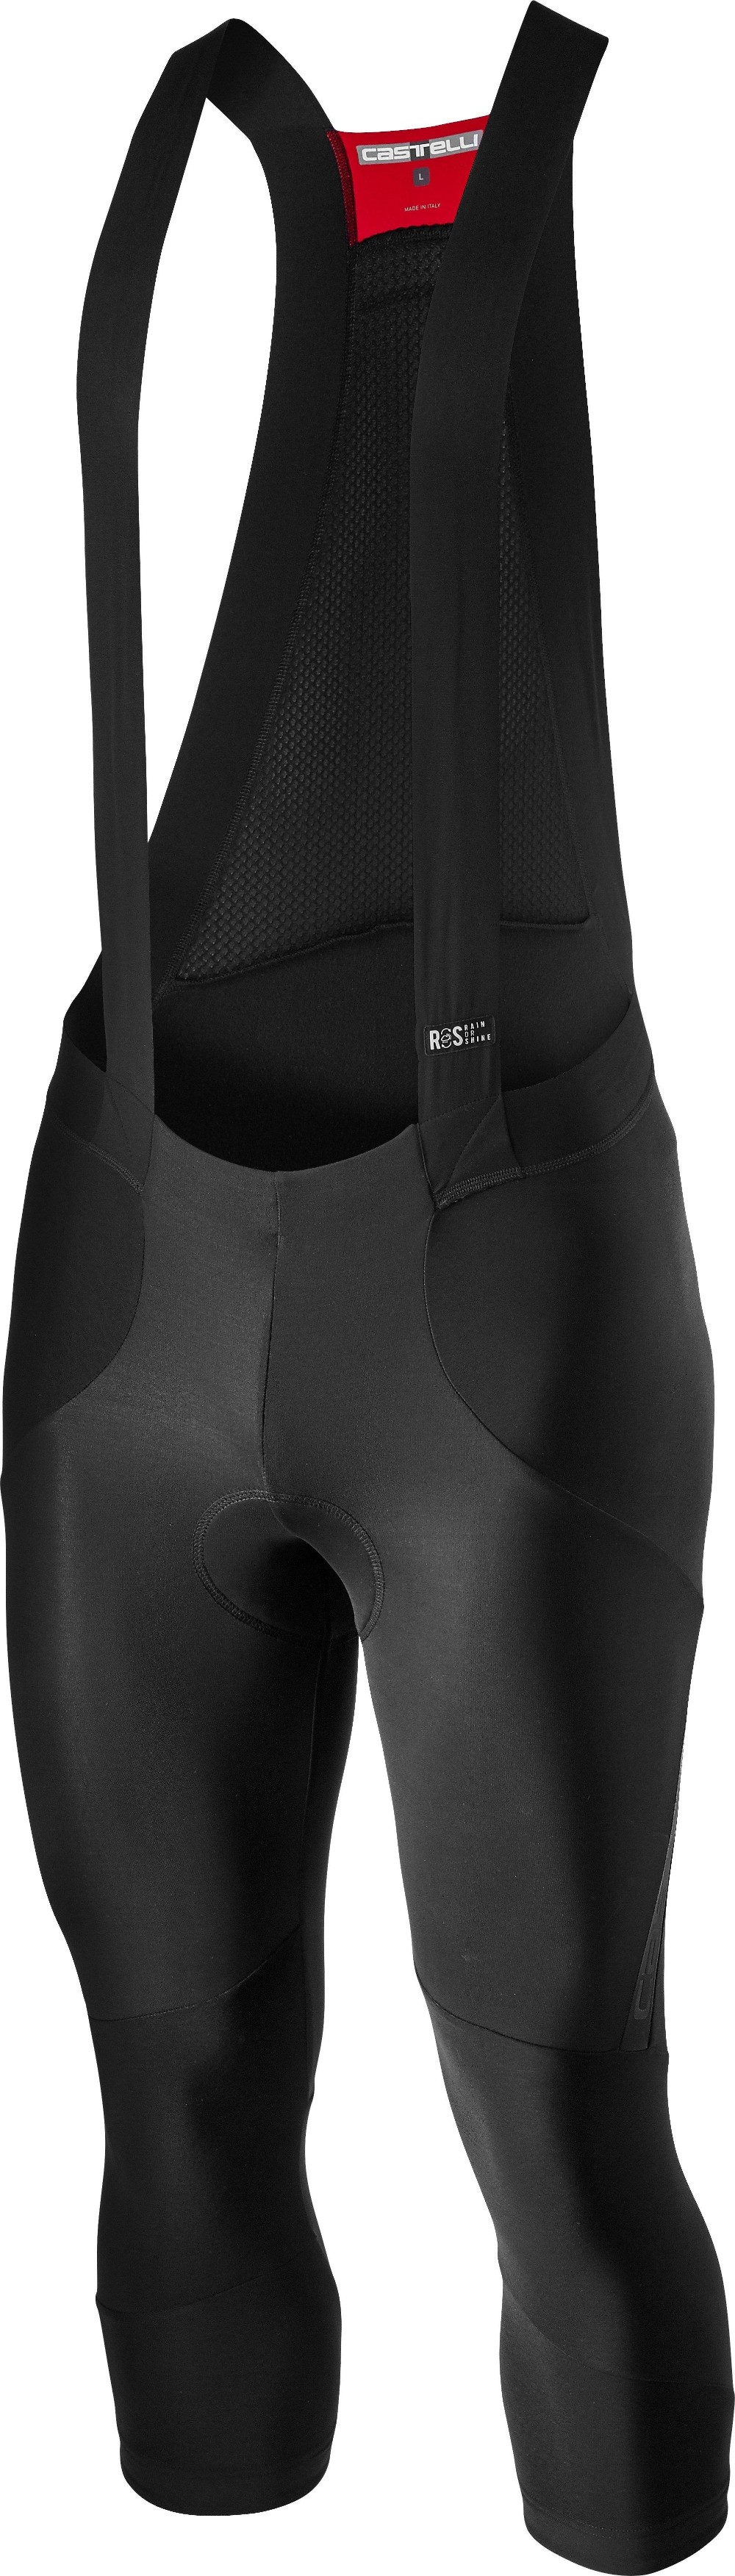 Sorpasso RoS Cycling Bib Knickers image 0